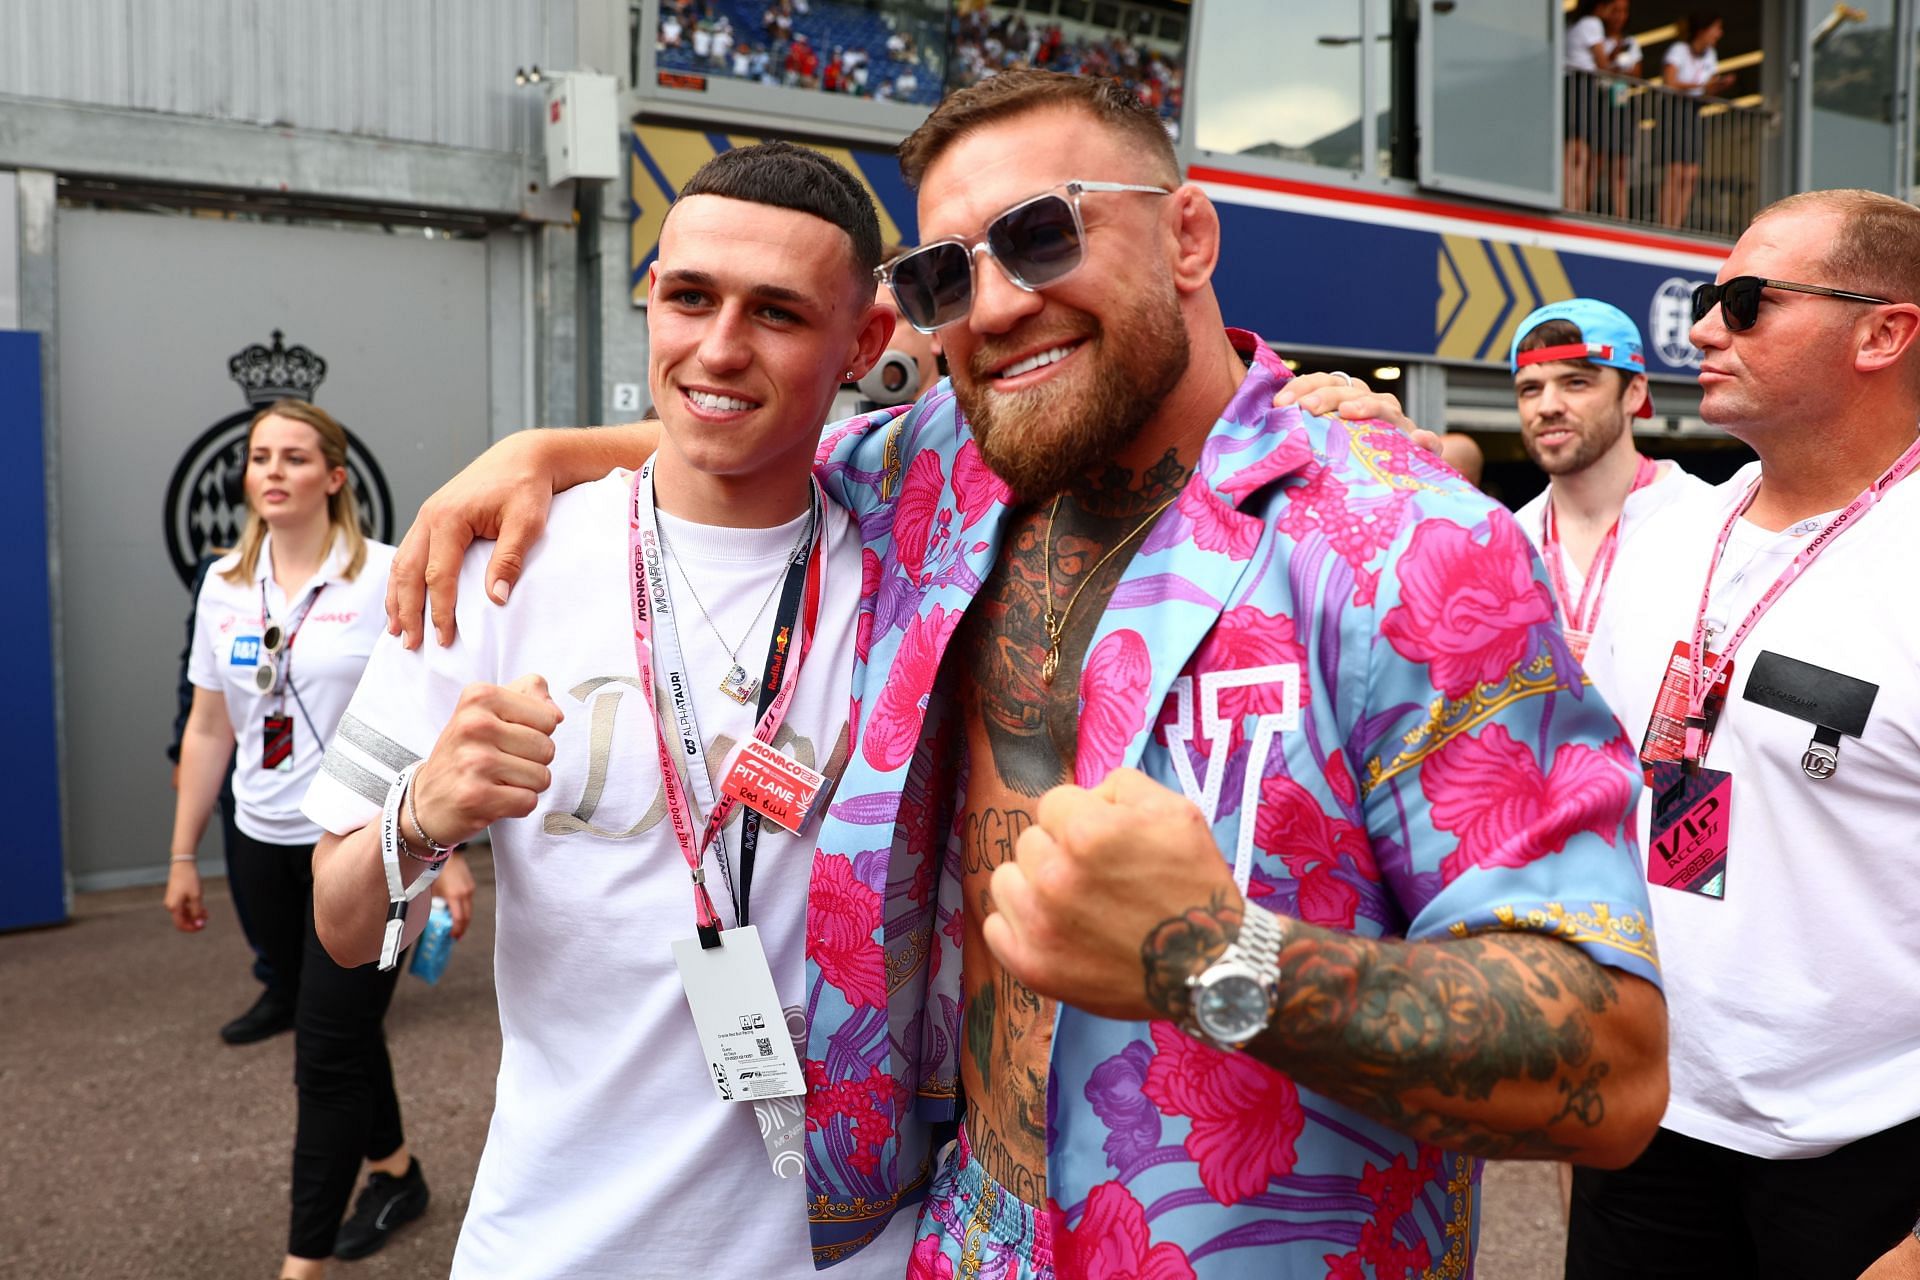 Conor McGregor (right) with Manchester City star Phil Foden at the F1 Monaco Grand Prix - Qualifying